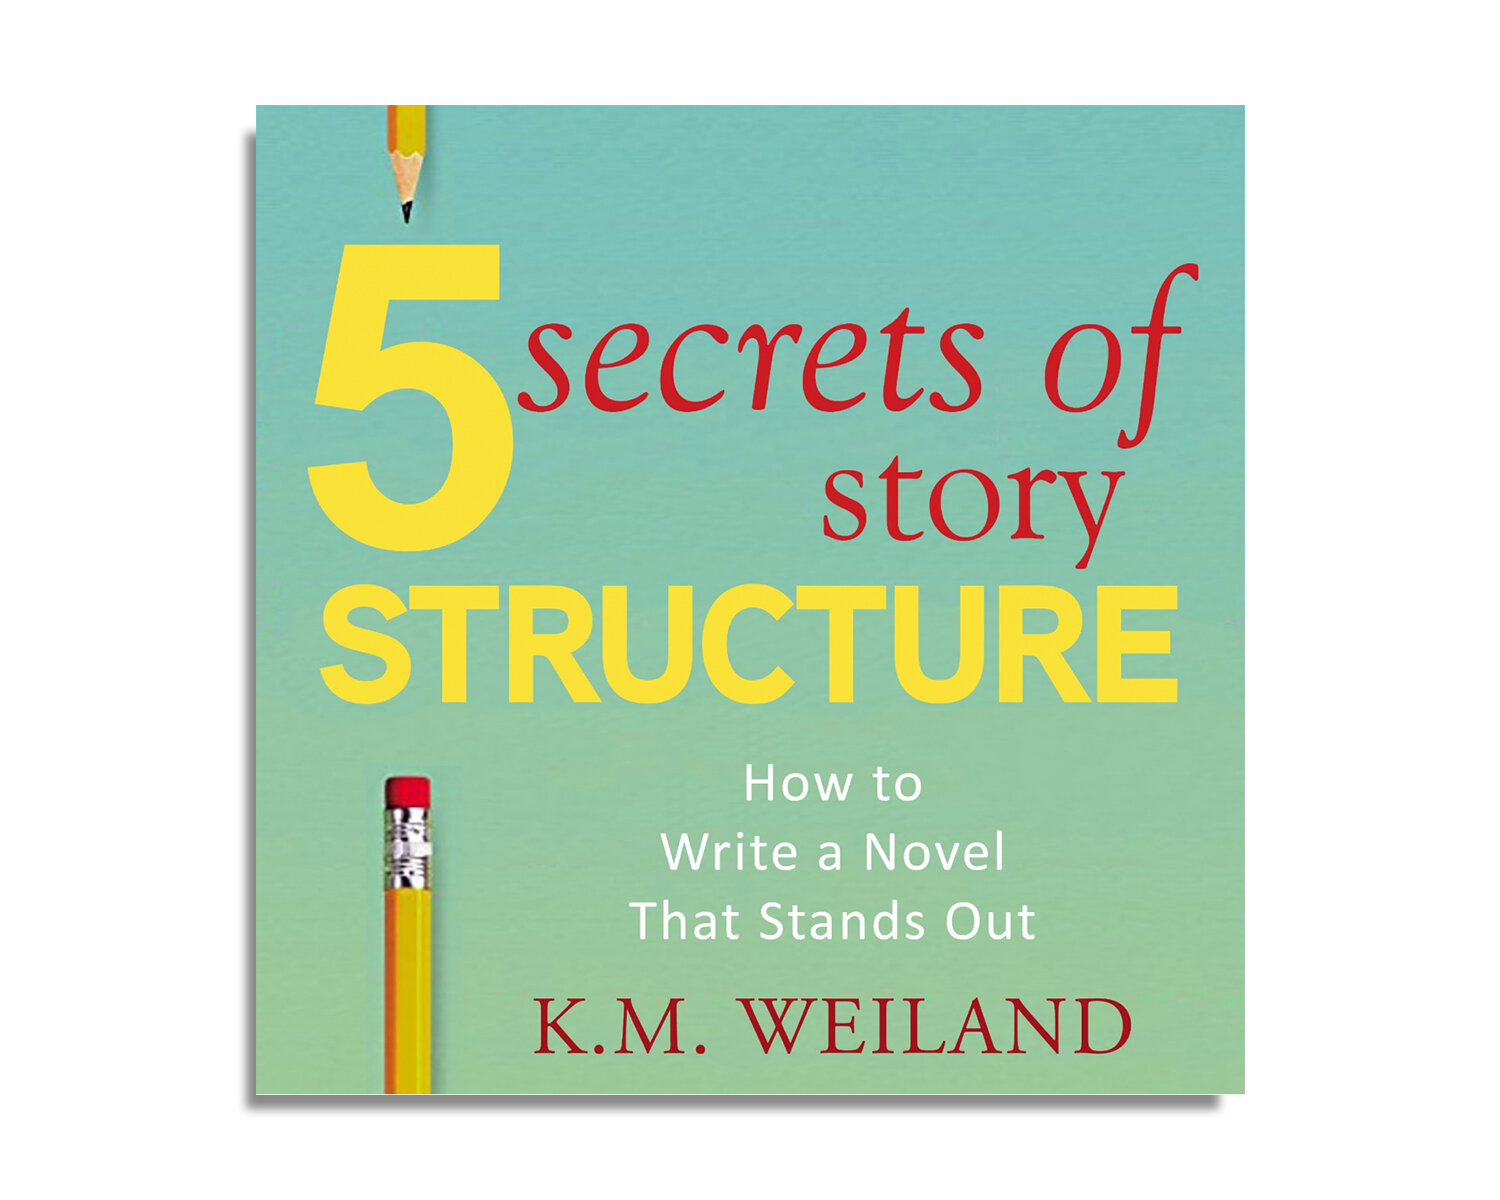 26 Secrets of Story Structure: How to Write a Novel That Stands Out